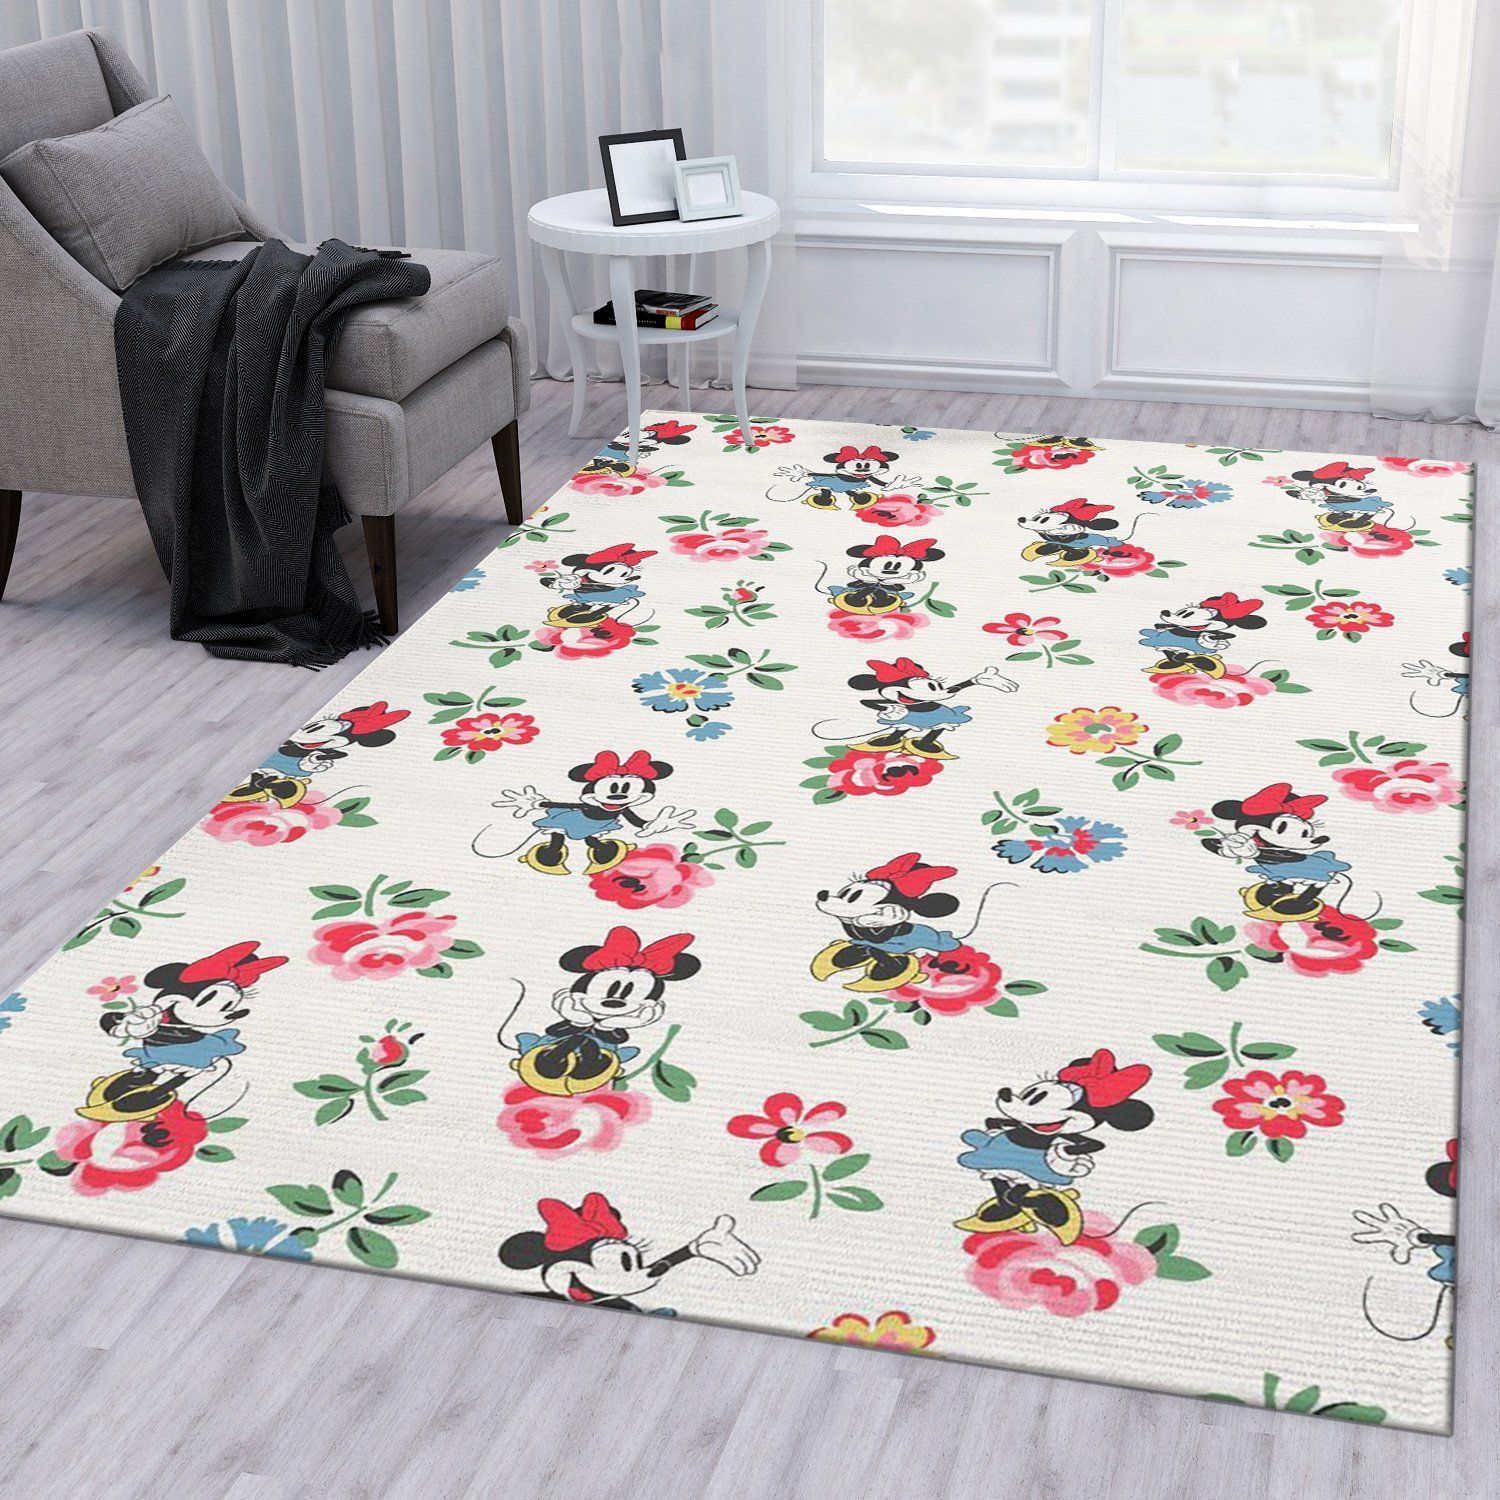 Minnie Mouse Ver2 Rug Living Room Rug Home US Decor - Indoor Outdoor Rugs 1